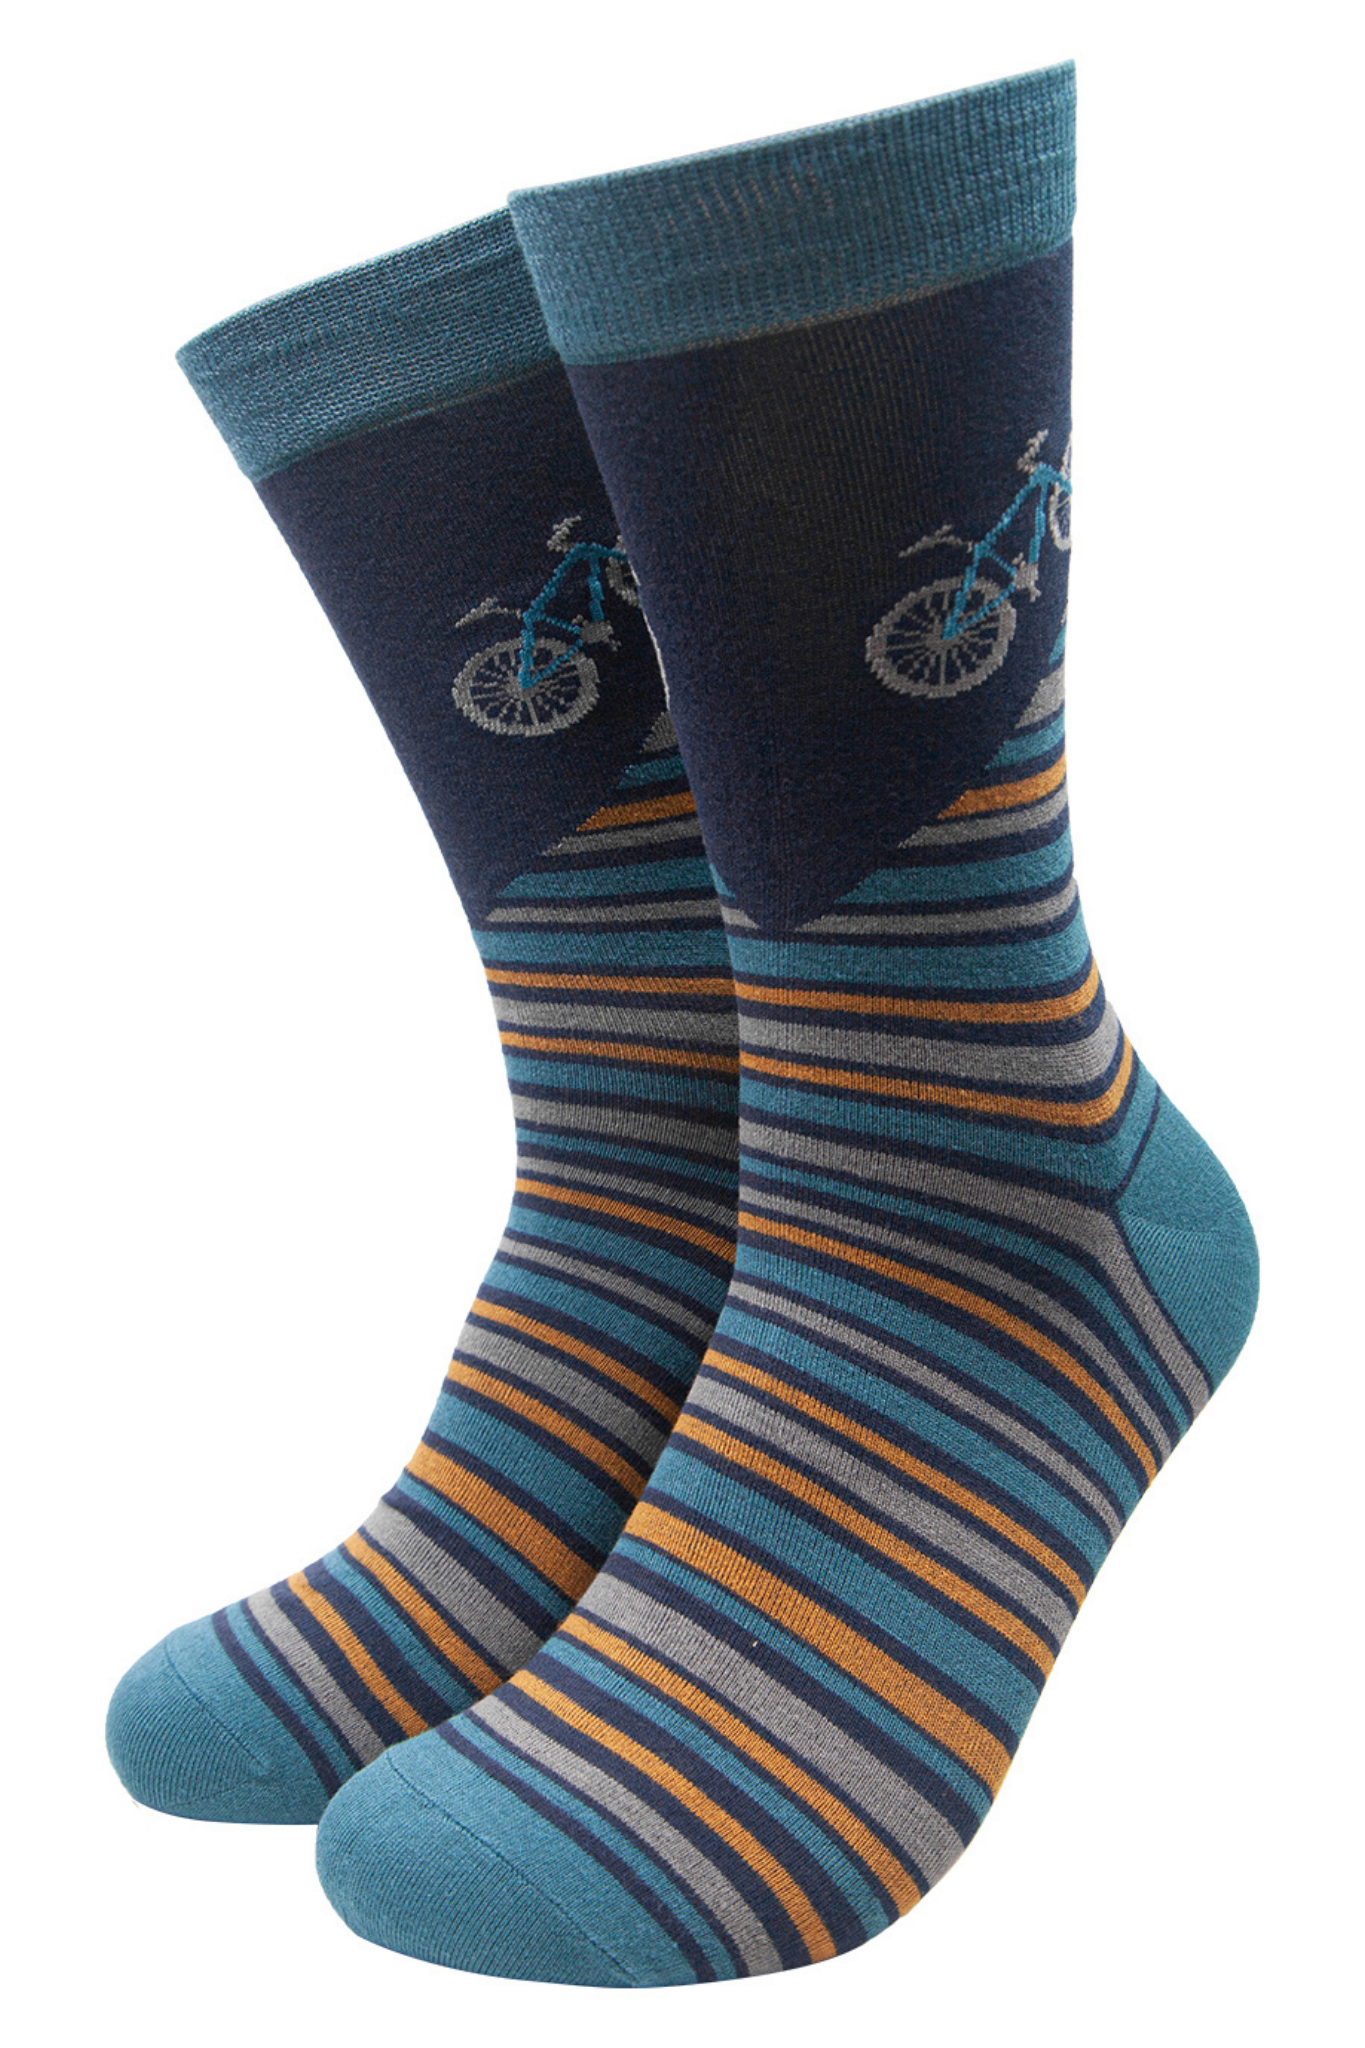 teal blue bamboo socks with stripes and a mountain bike